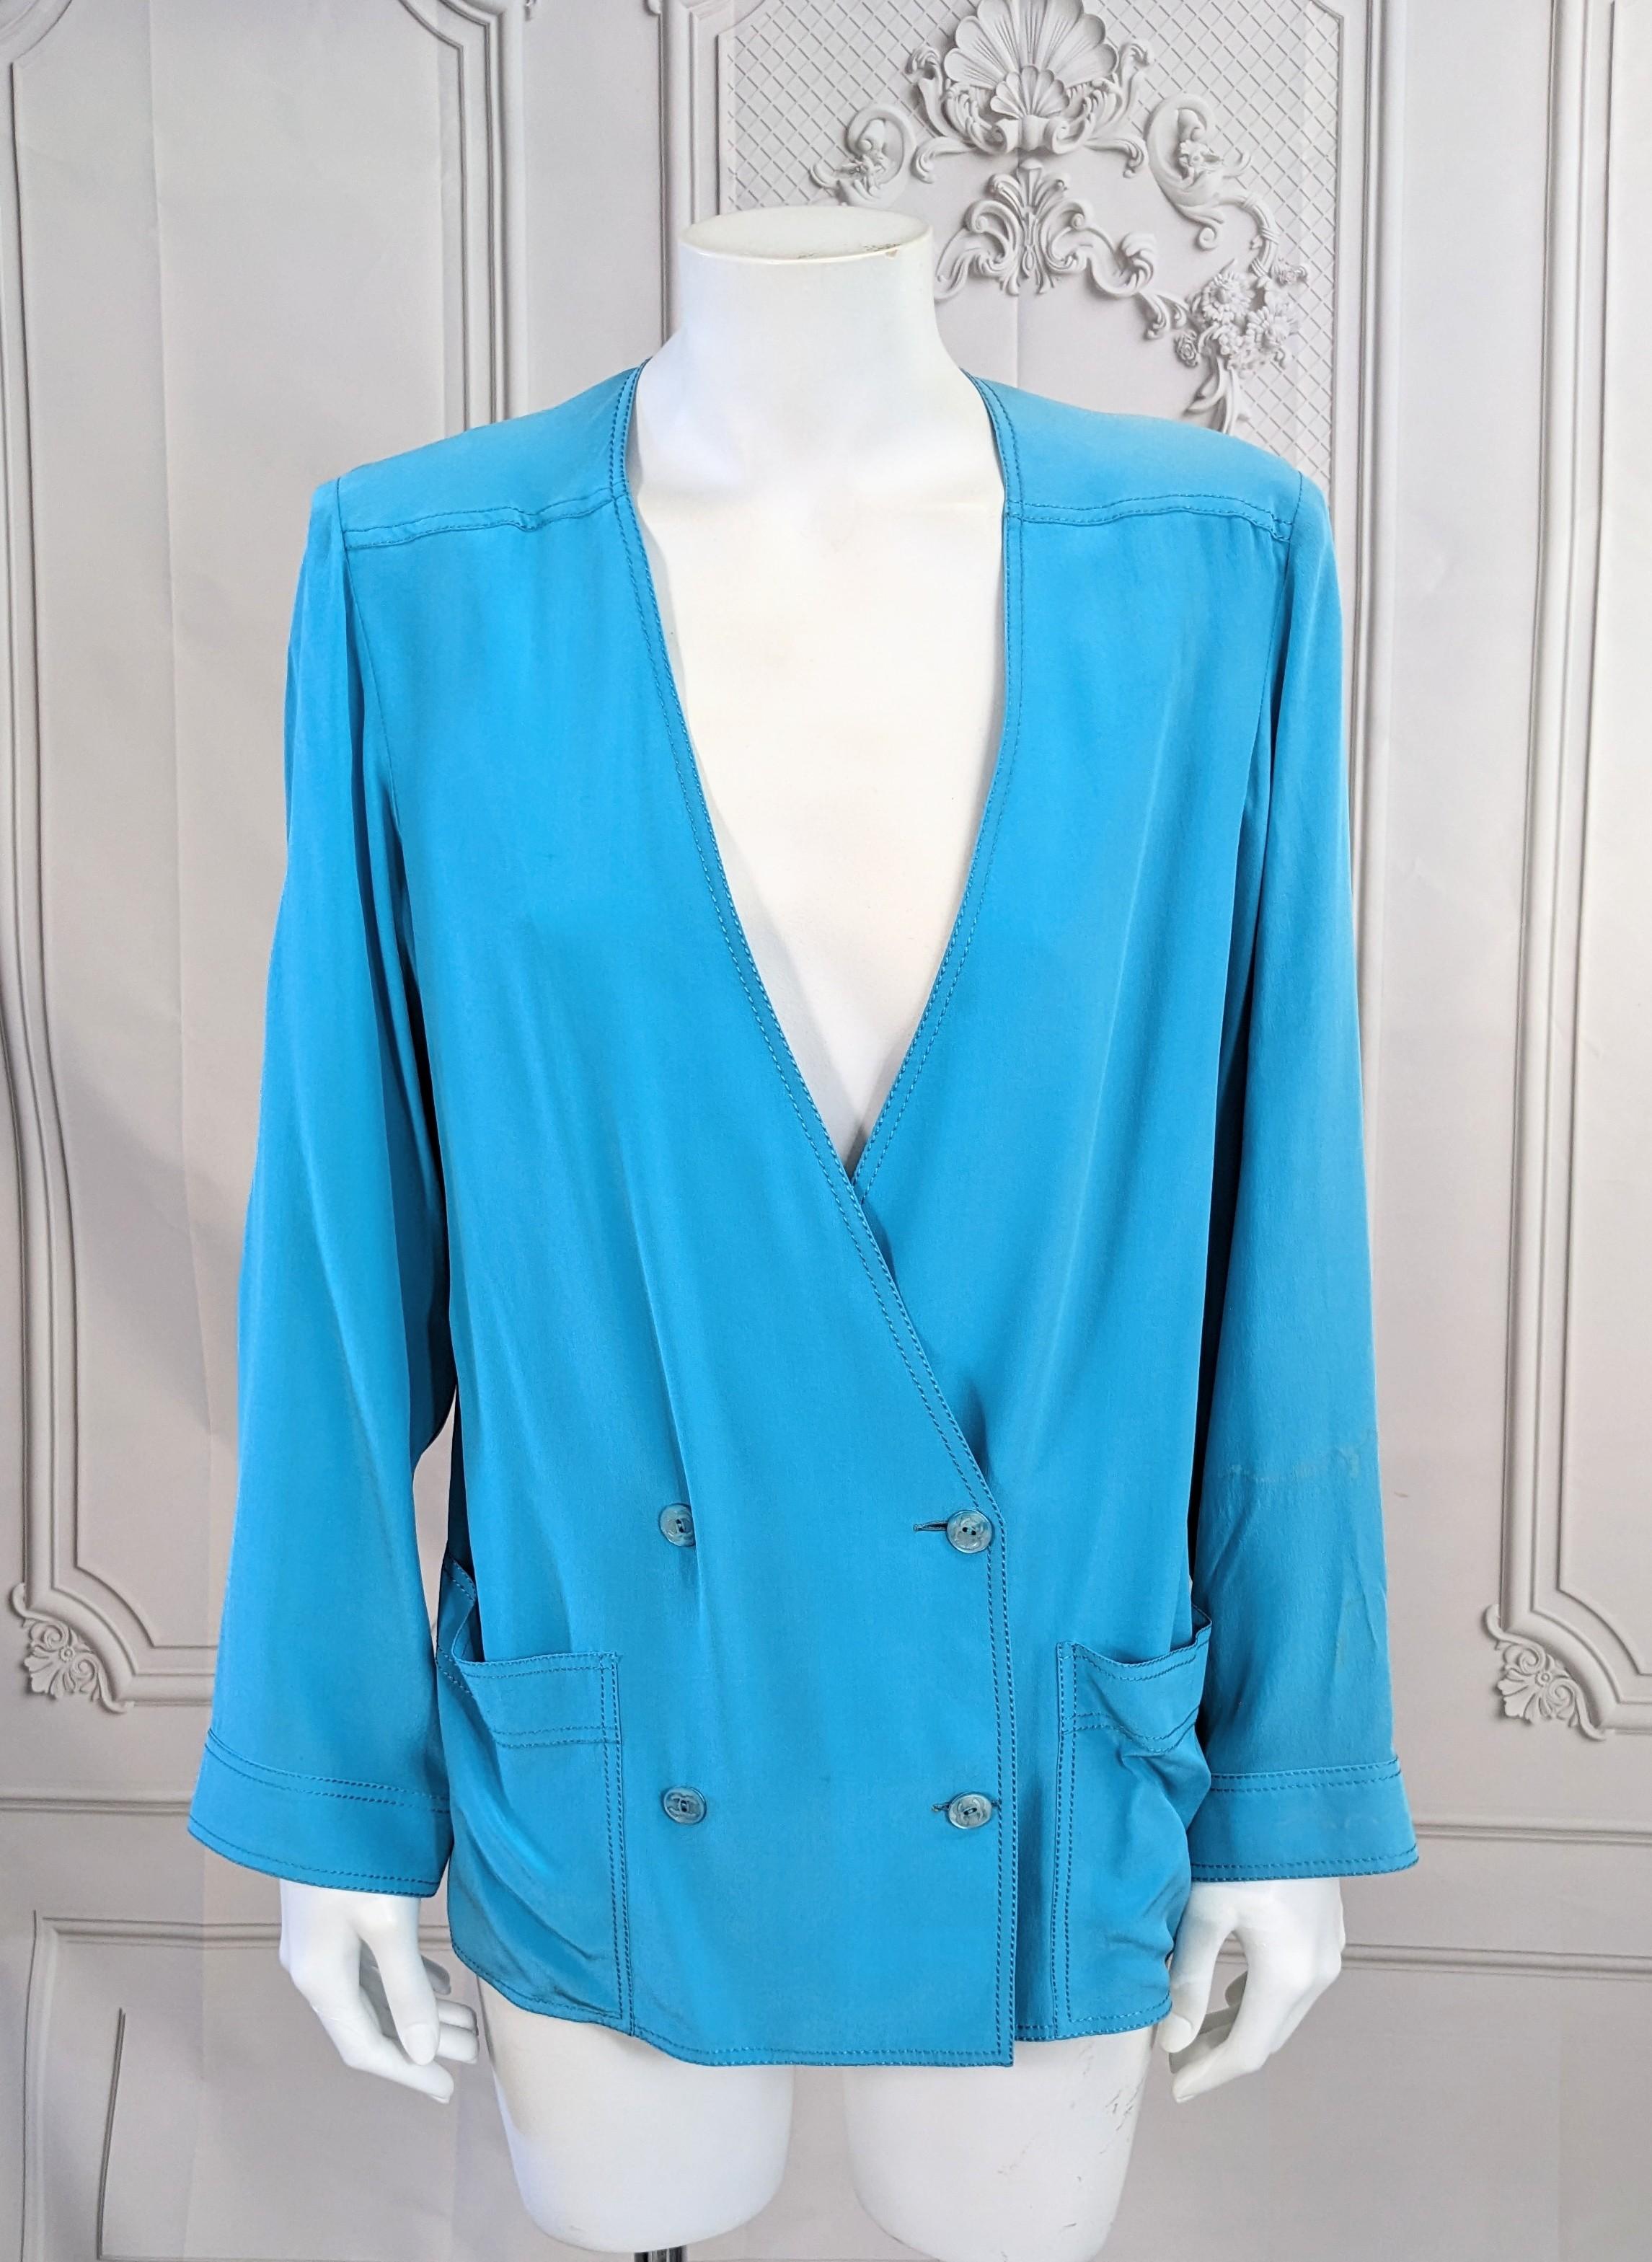 Chanel Turquoise Silk Crepe Blouse styled as a double breasted jacket. Can be worn as a blouse or an outer layer as well. Turquoise silk crepe with heavy silk topstitching and CC Mother of pearl buttons. Straight boxy cut. 1970's France. 